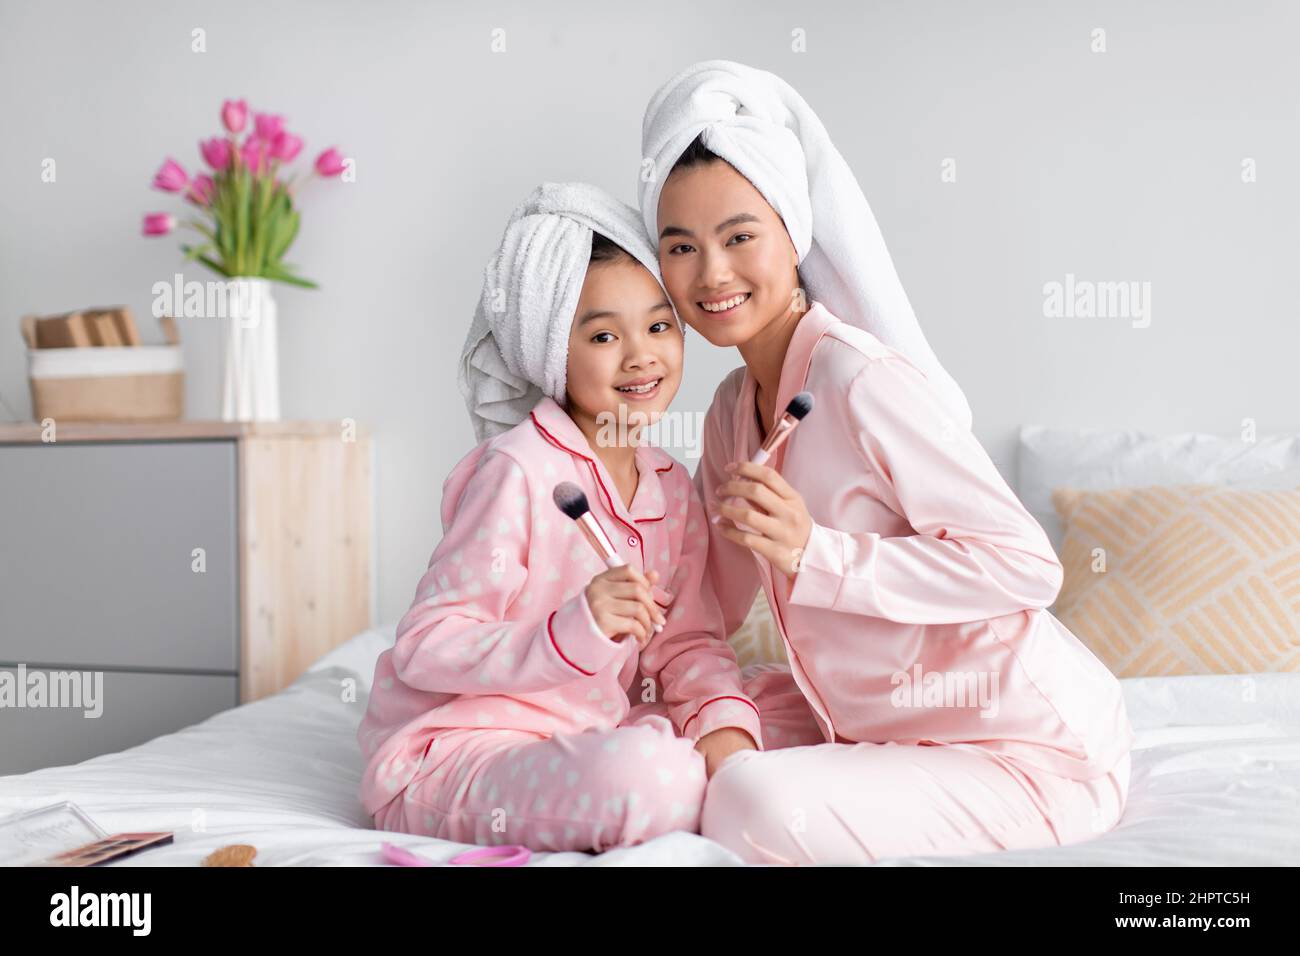 Smiling young pretty japanese female and teenage girl in pajamas and towel sit on bed with makeup brushes Stock Photo